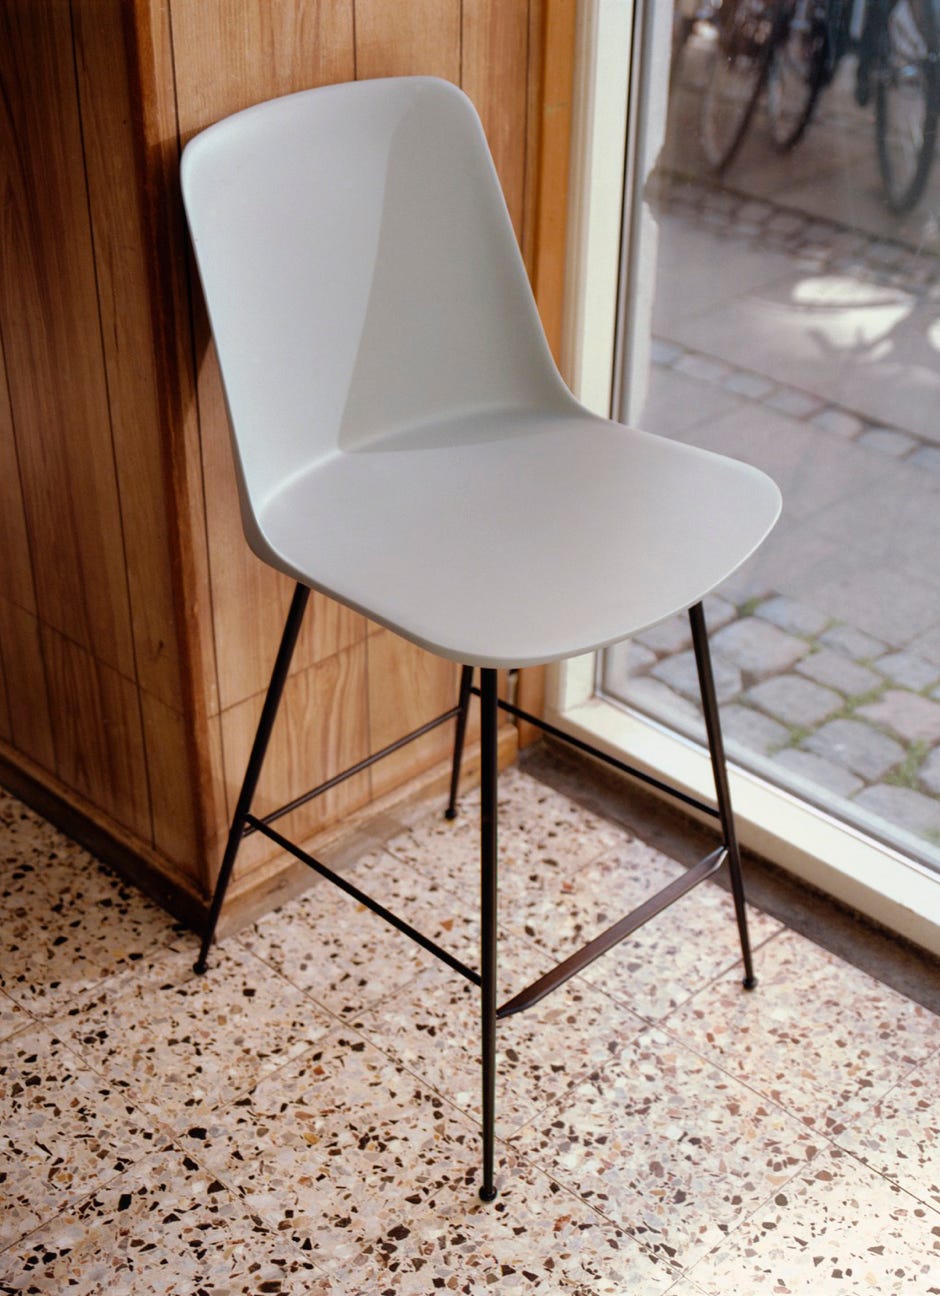 Rely Bar stool  &Tradition  Hee Welling, 2022 